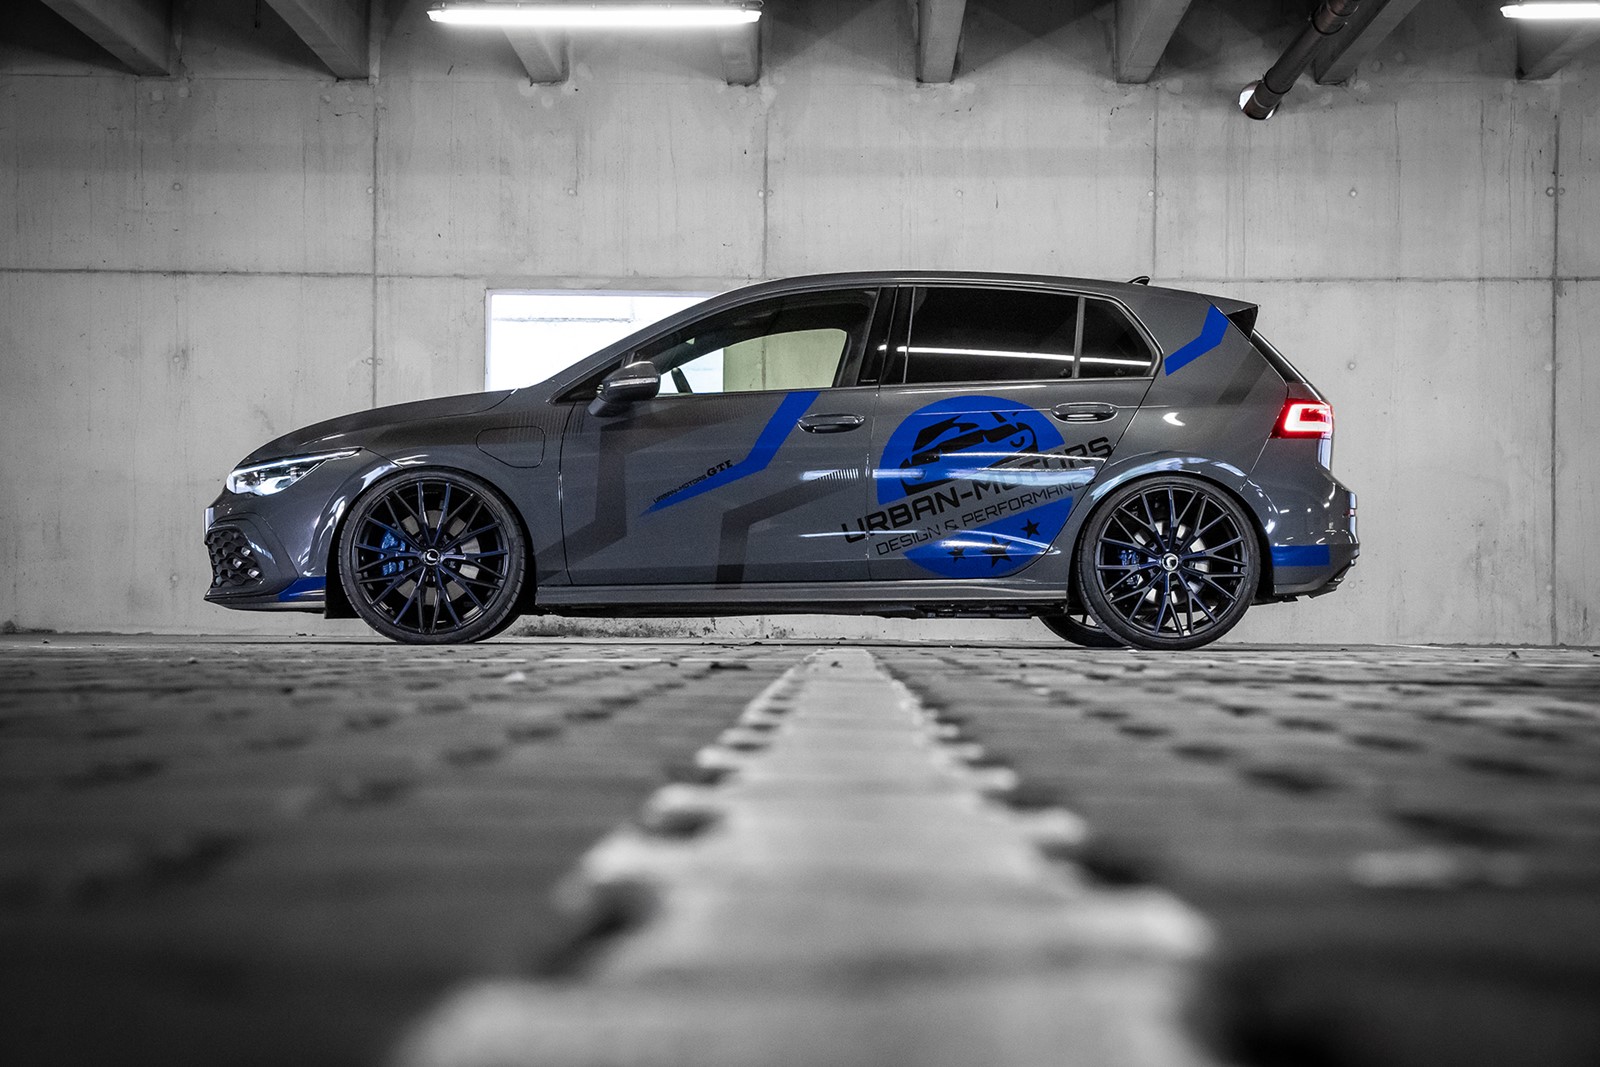 If you are looking for a spicy touch for the Volkswagen Golf GTE, Urban Motors has the solution